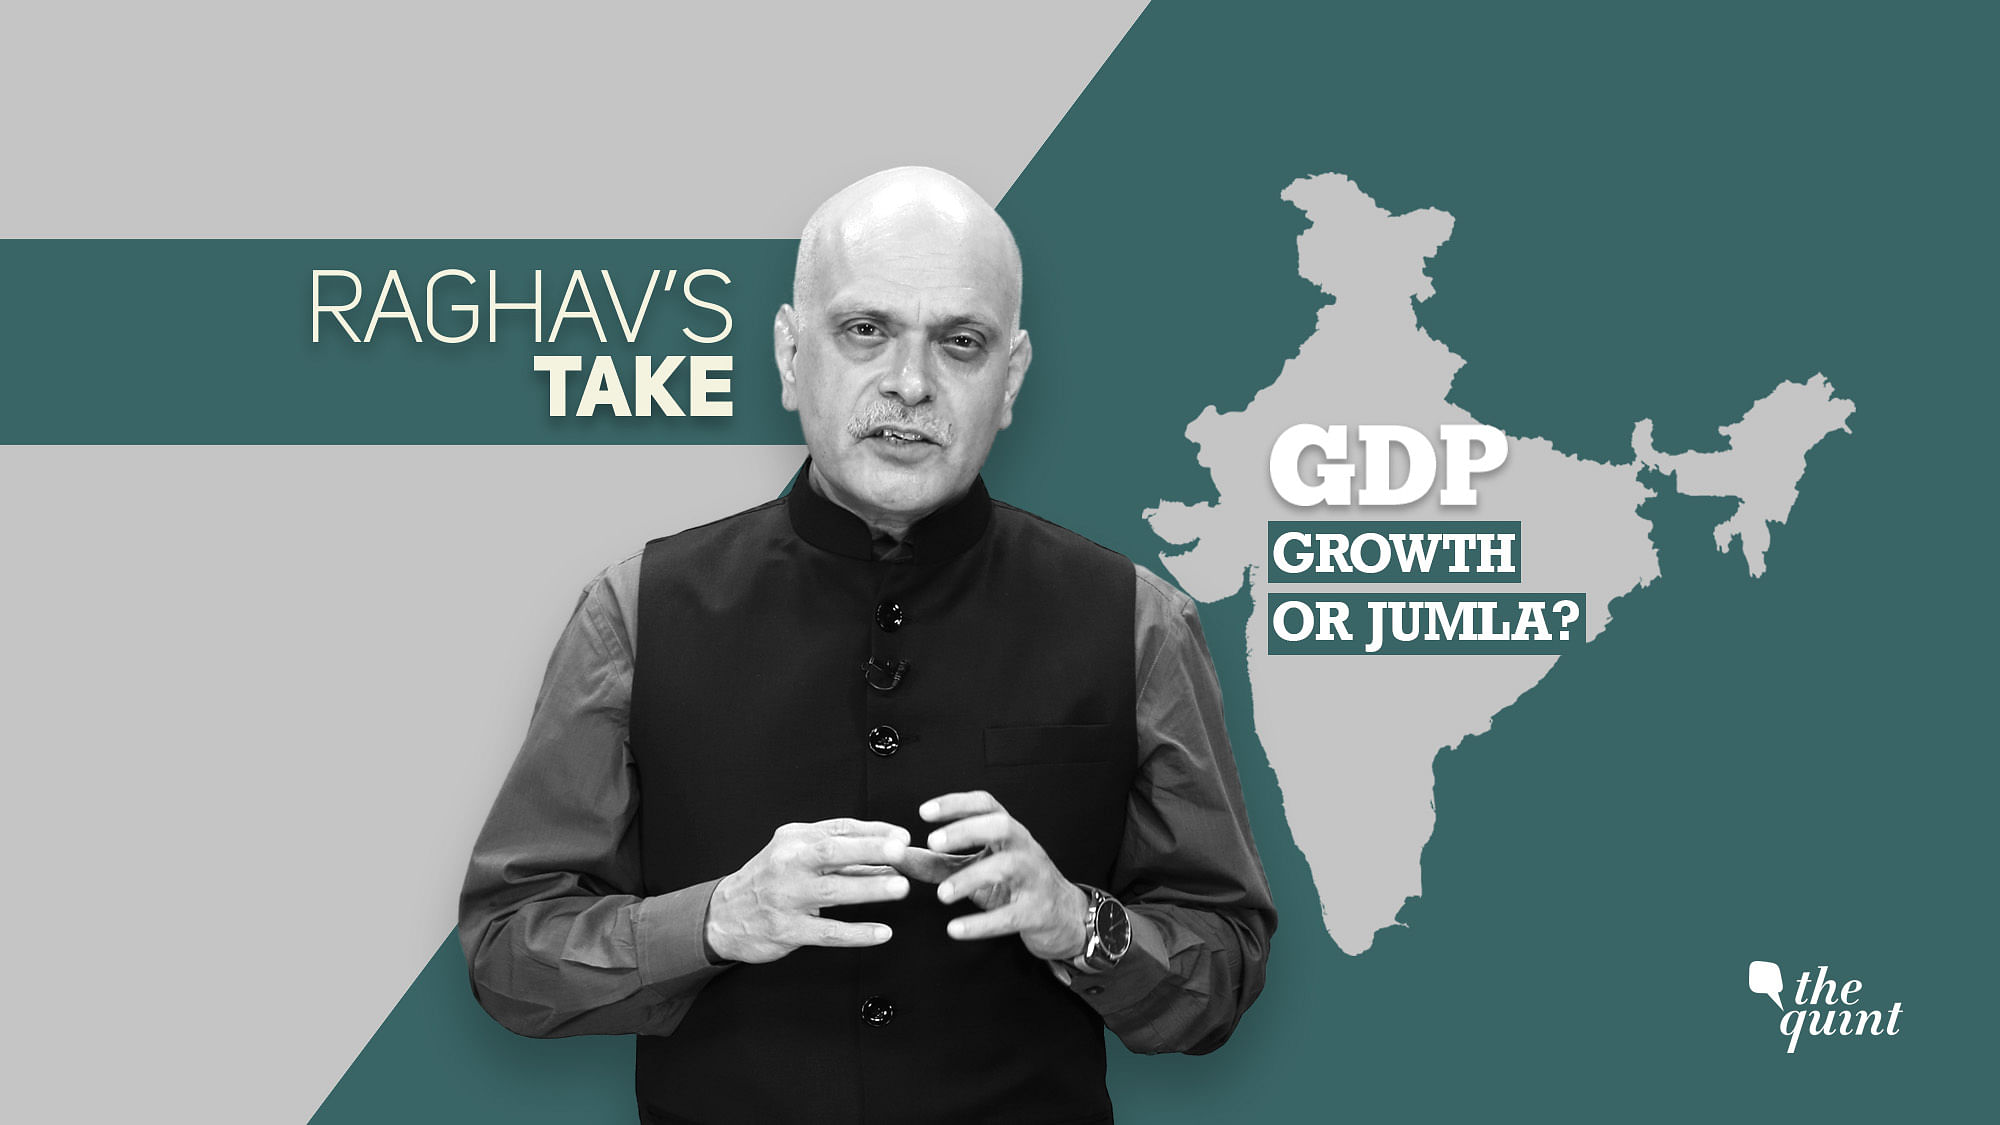 GDP is as much a Gross Economic Jumla as the Gospel of Prosperity that Prime Minister Modi is making his 2019 re-election pitch.